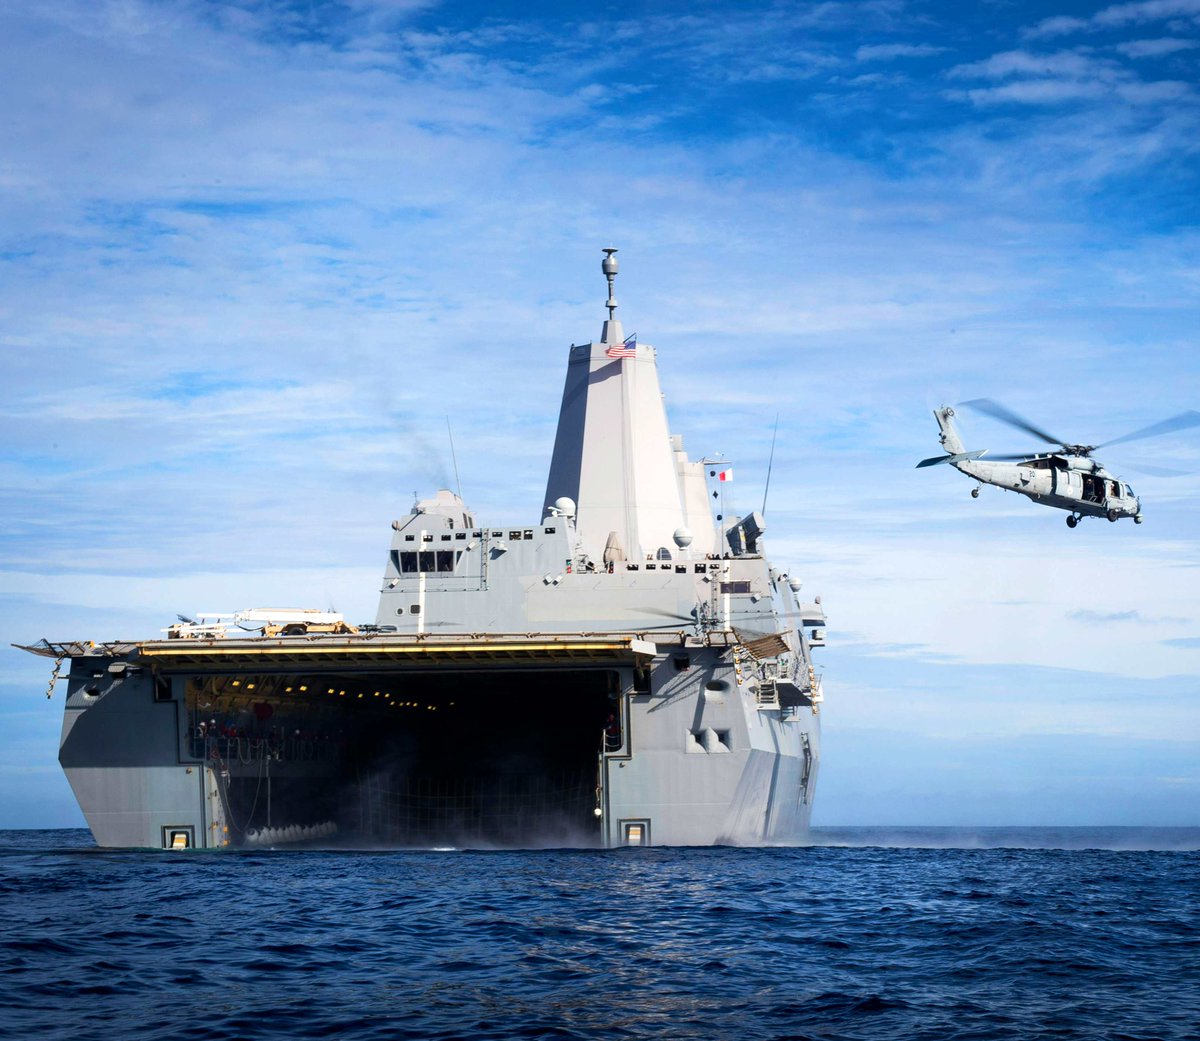 Check out this MH60-S Sea Hawk helicopter takes off from the amphibious transport dock ship USS Anchorage as part of at-sea training!

#MH60 #USSAnchorage #Helicopter #Ship #Boat #Navy #USNavy #Naval #Maritime #SeaHawk #Military #MilitaryMachine